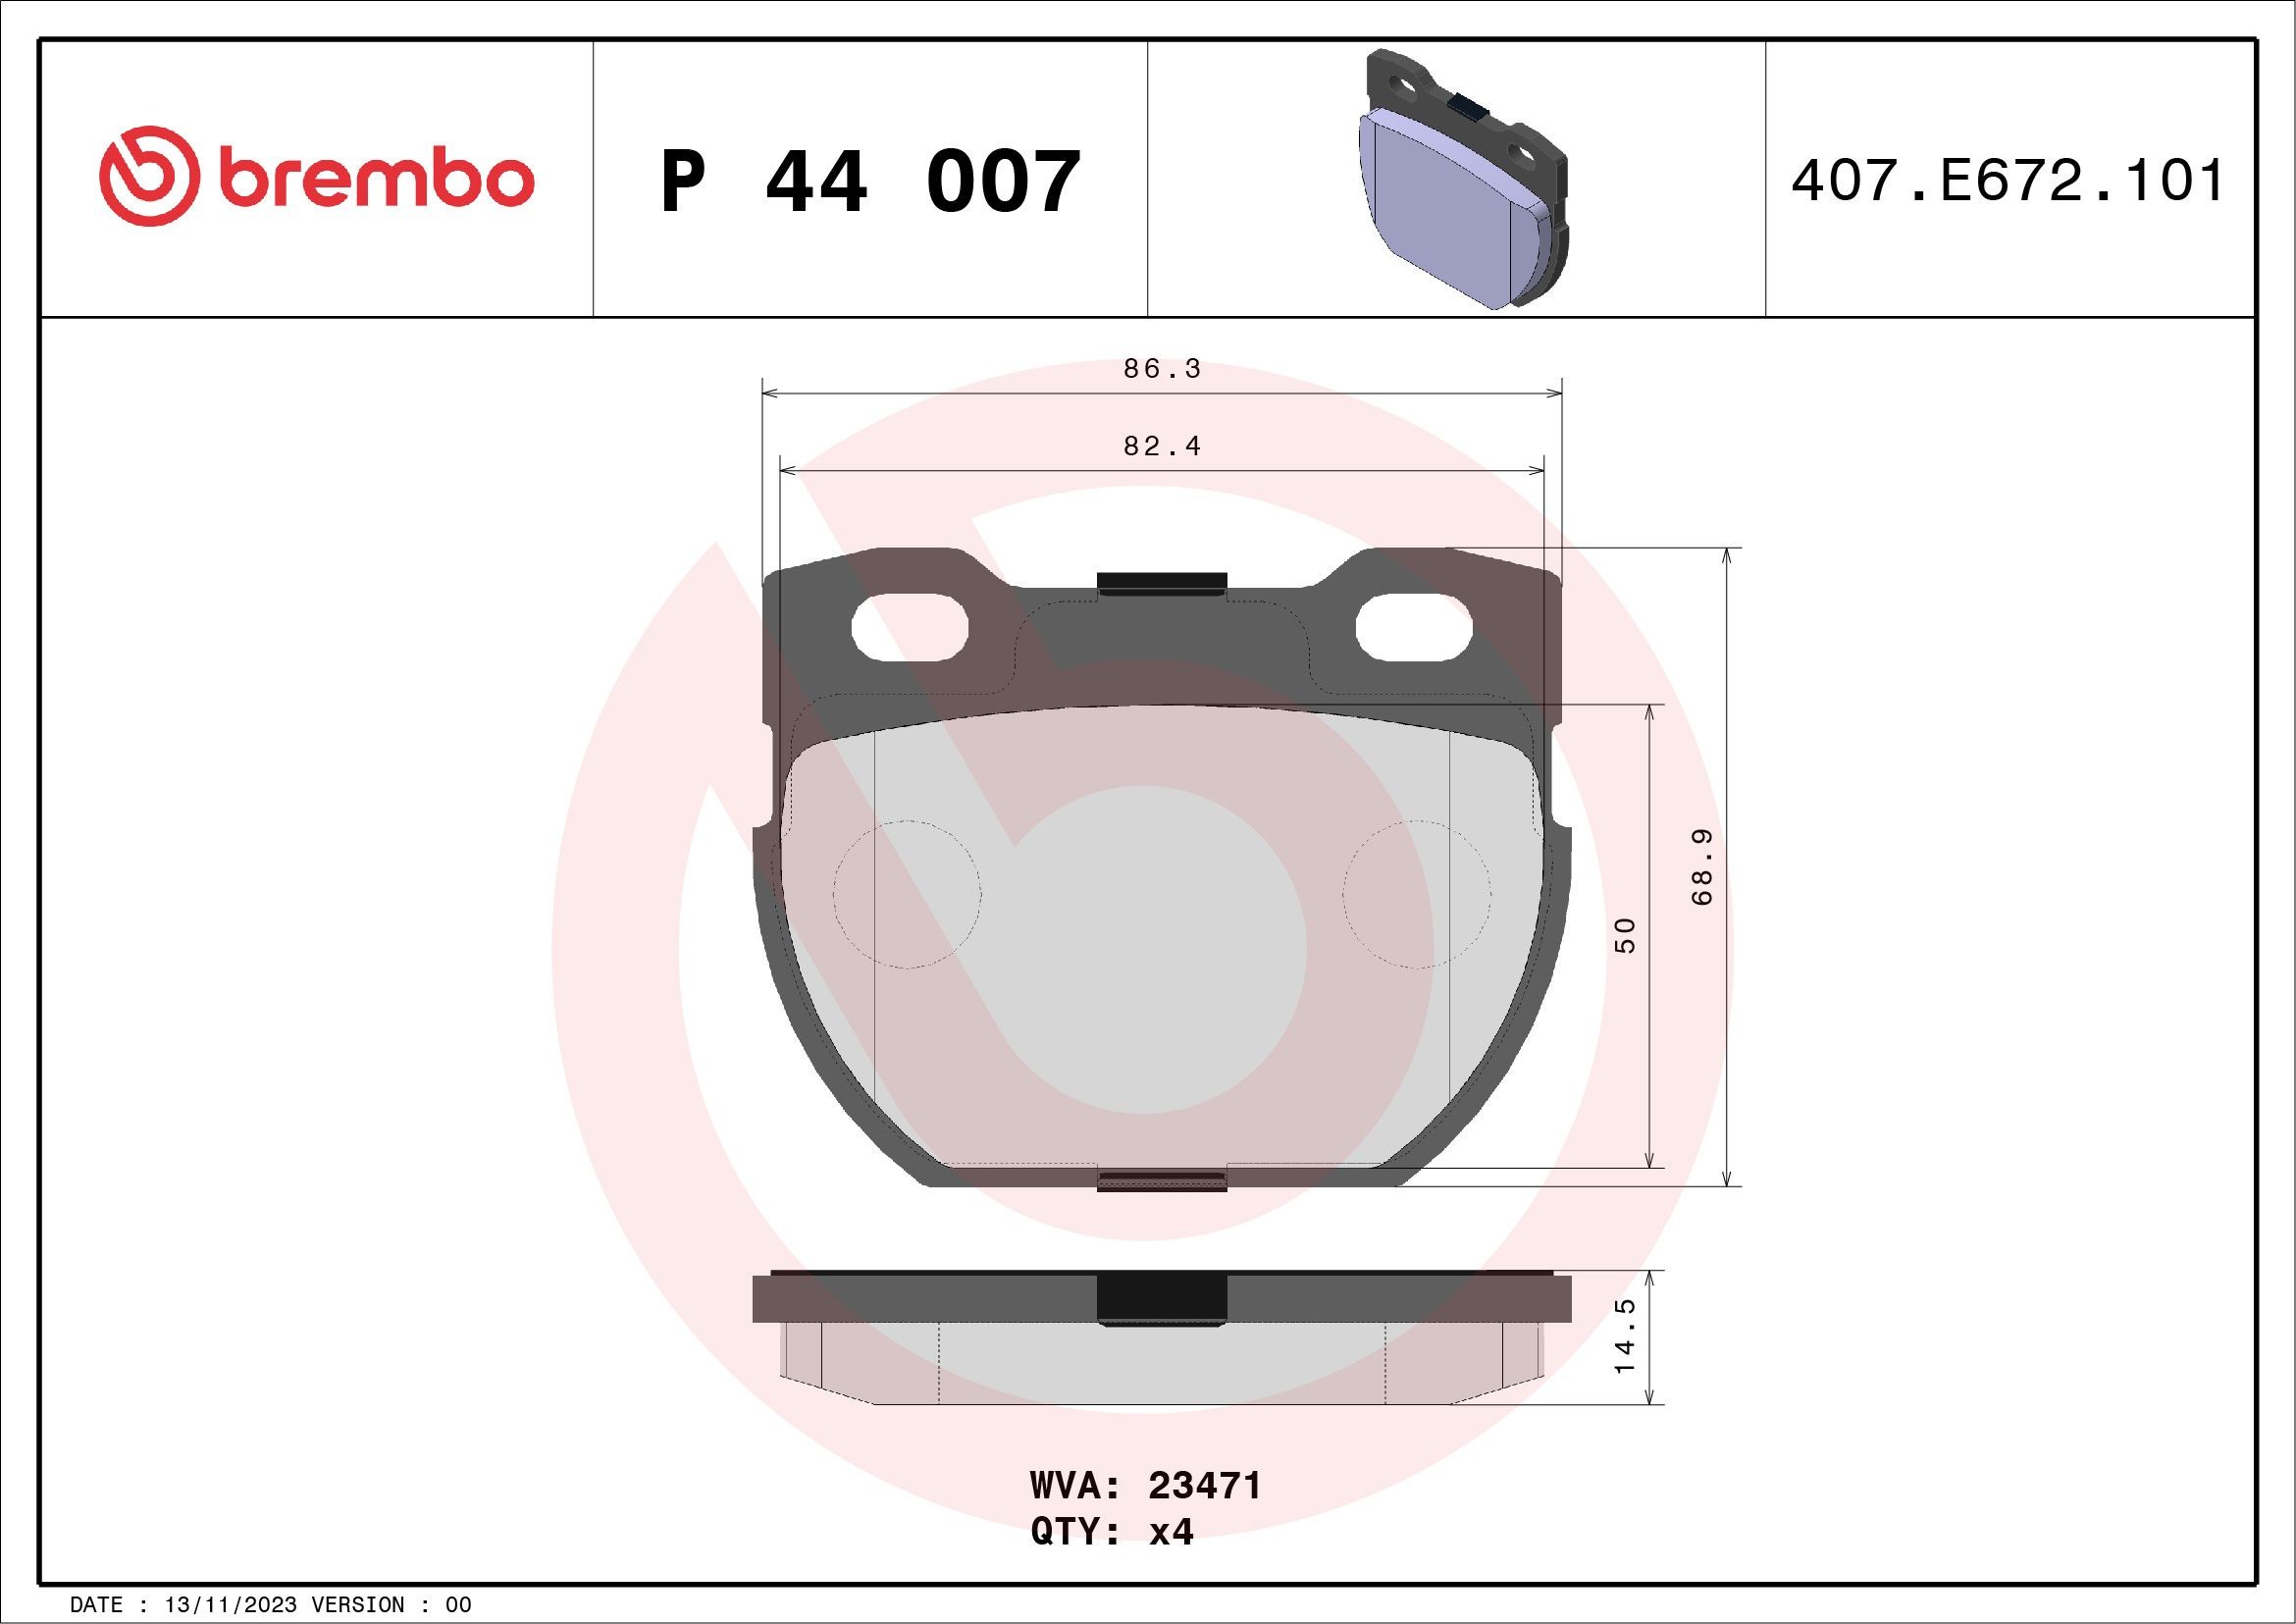 BREMBO P 44 007 Brake pad set excl. wear warning contact, without accessories